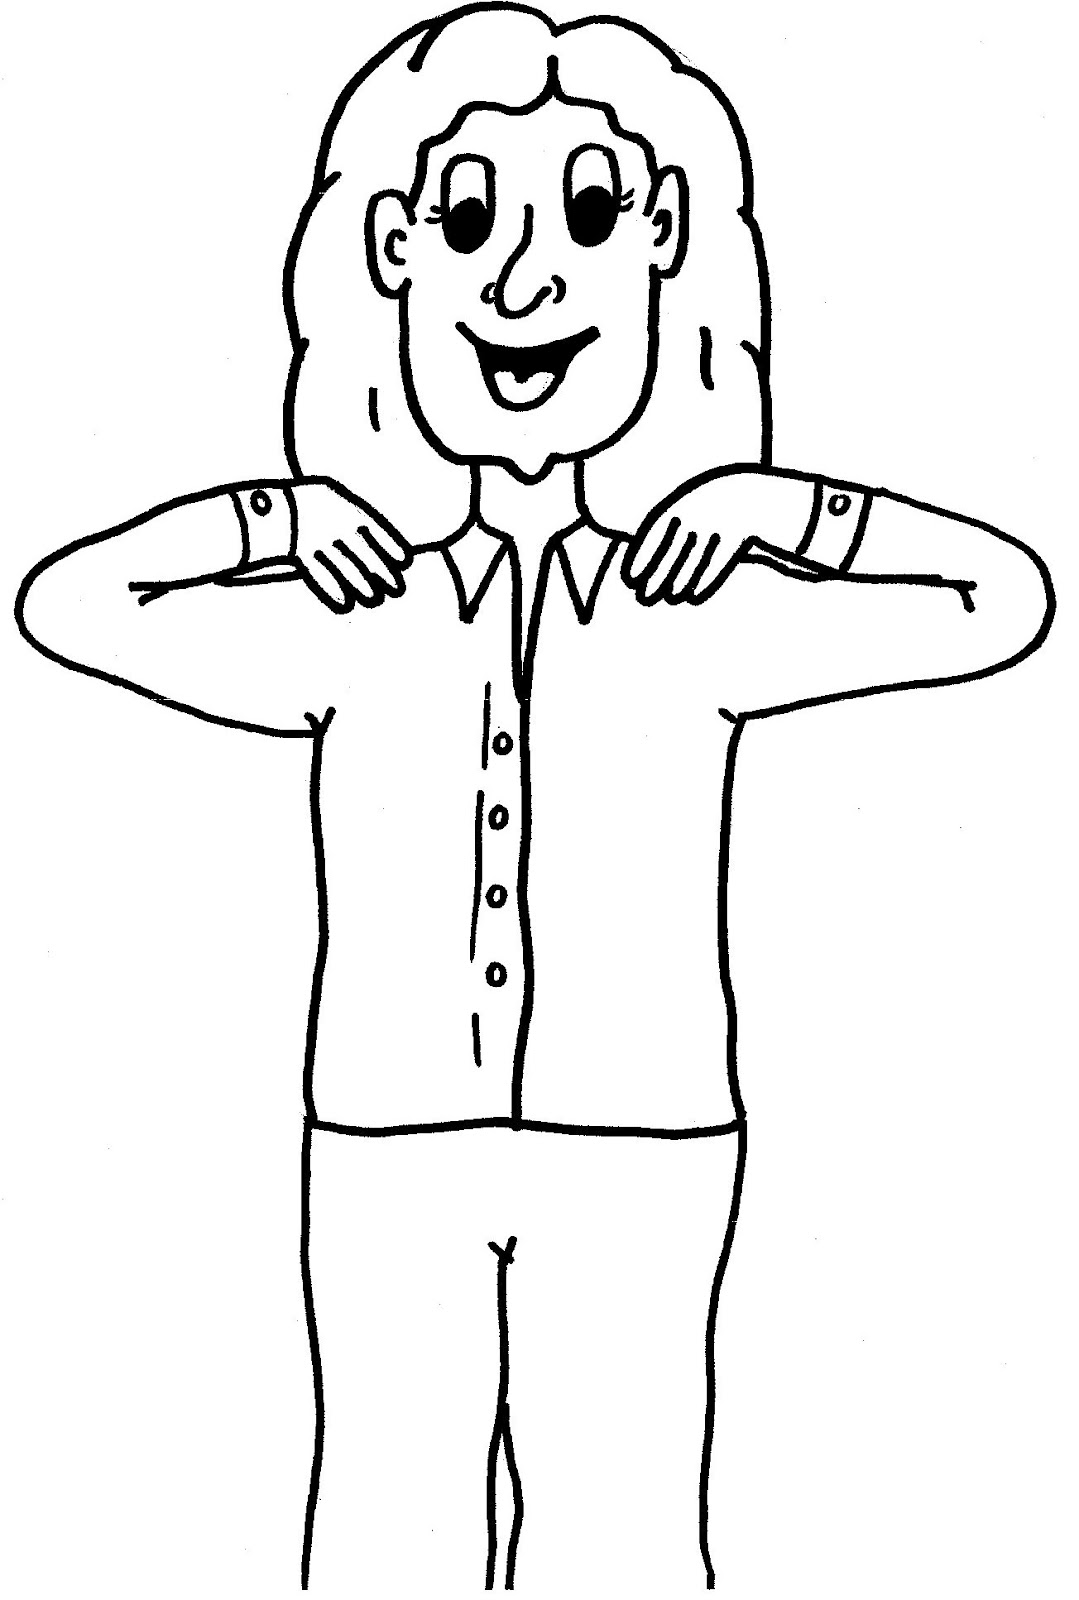 Clip Arts Related To : standing on shoulders clipart. 